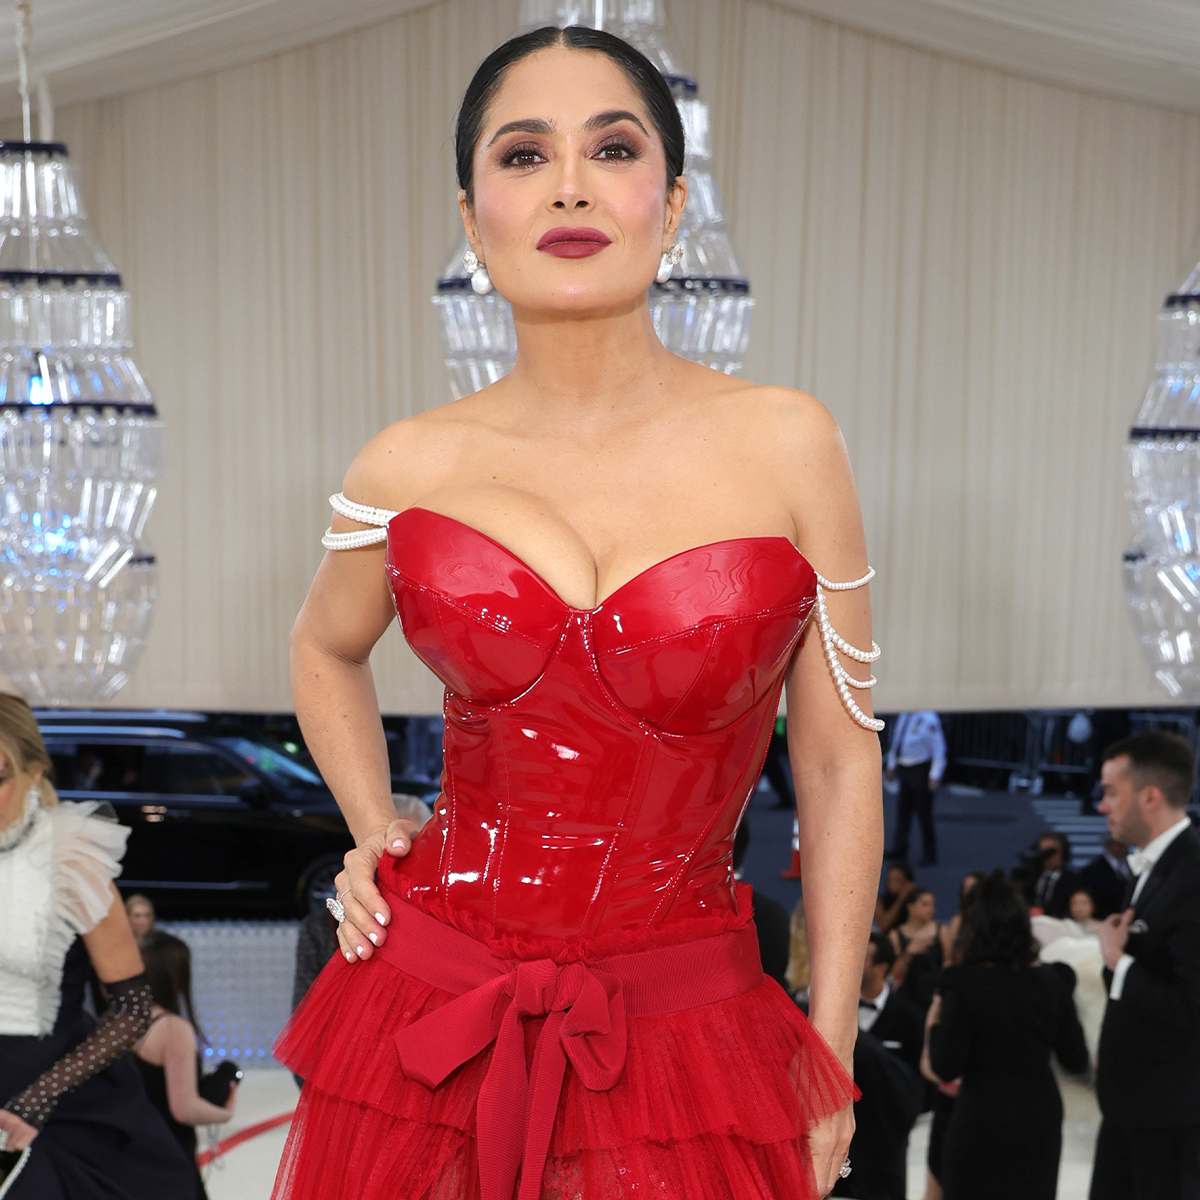 Salma Hayek’s Secret to Maintaining Her Appearance Will Surprise You